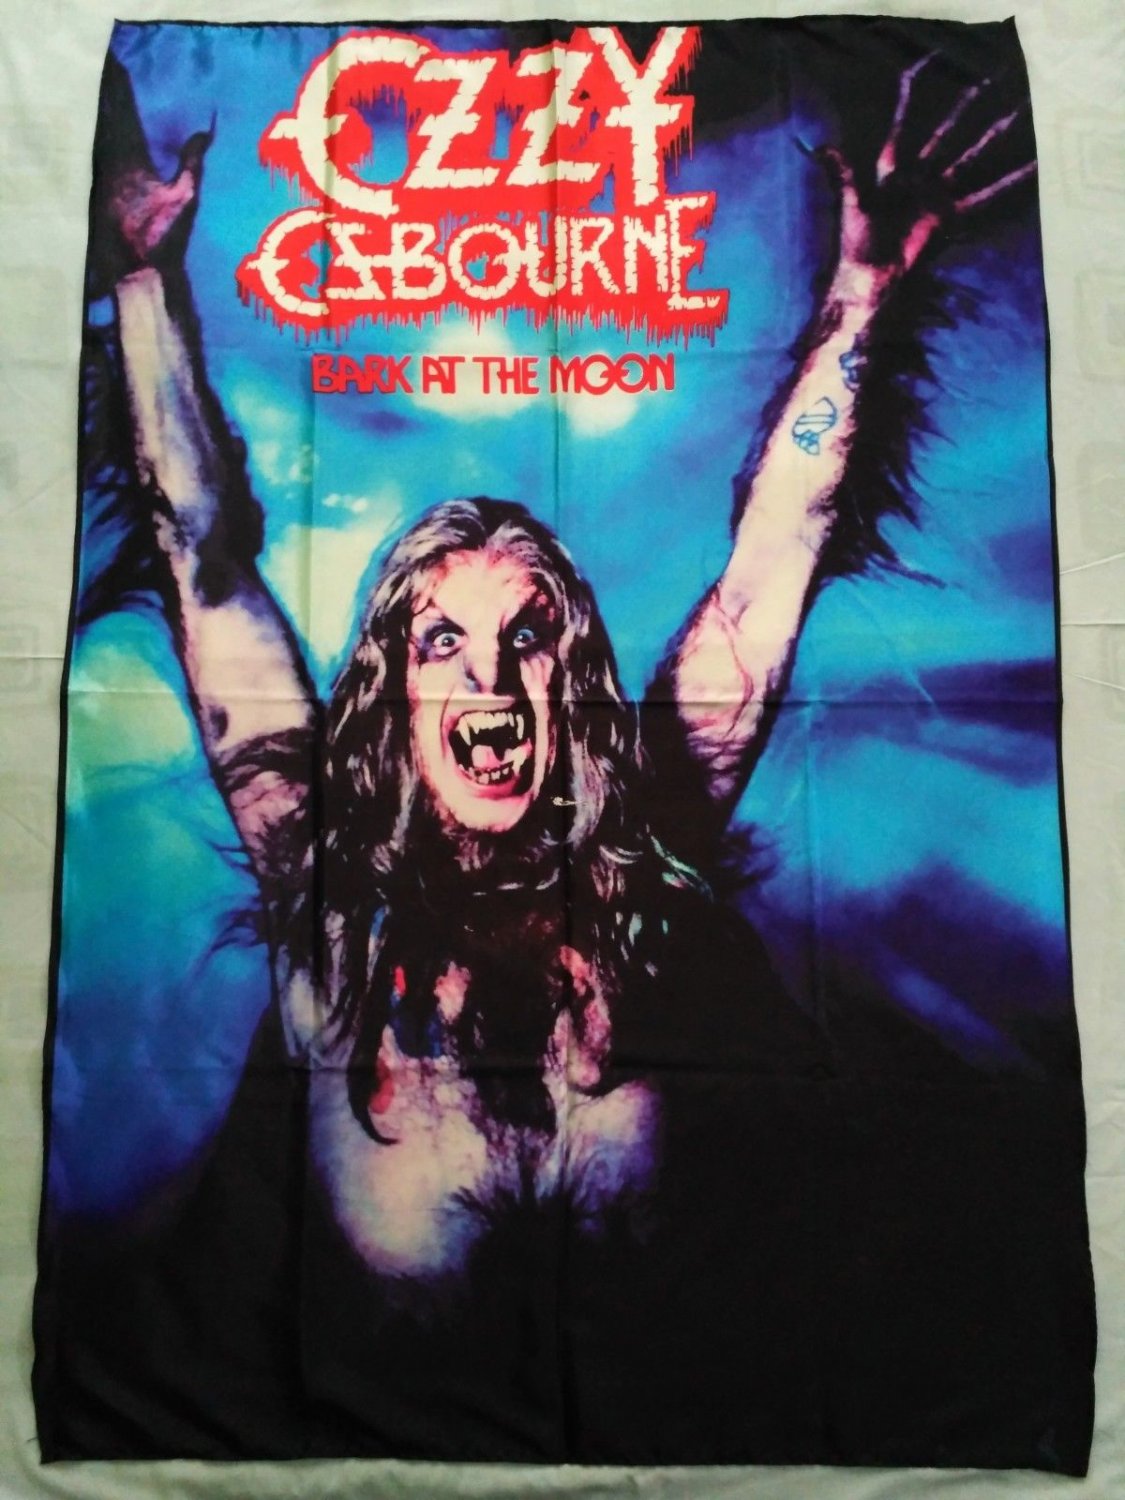 OZZY OSBOURNE - Bark at the moon FLAG cloth POSTER Banner Heavy METAL NWOBHM